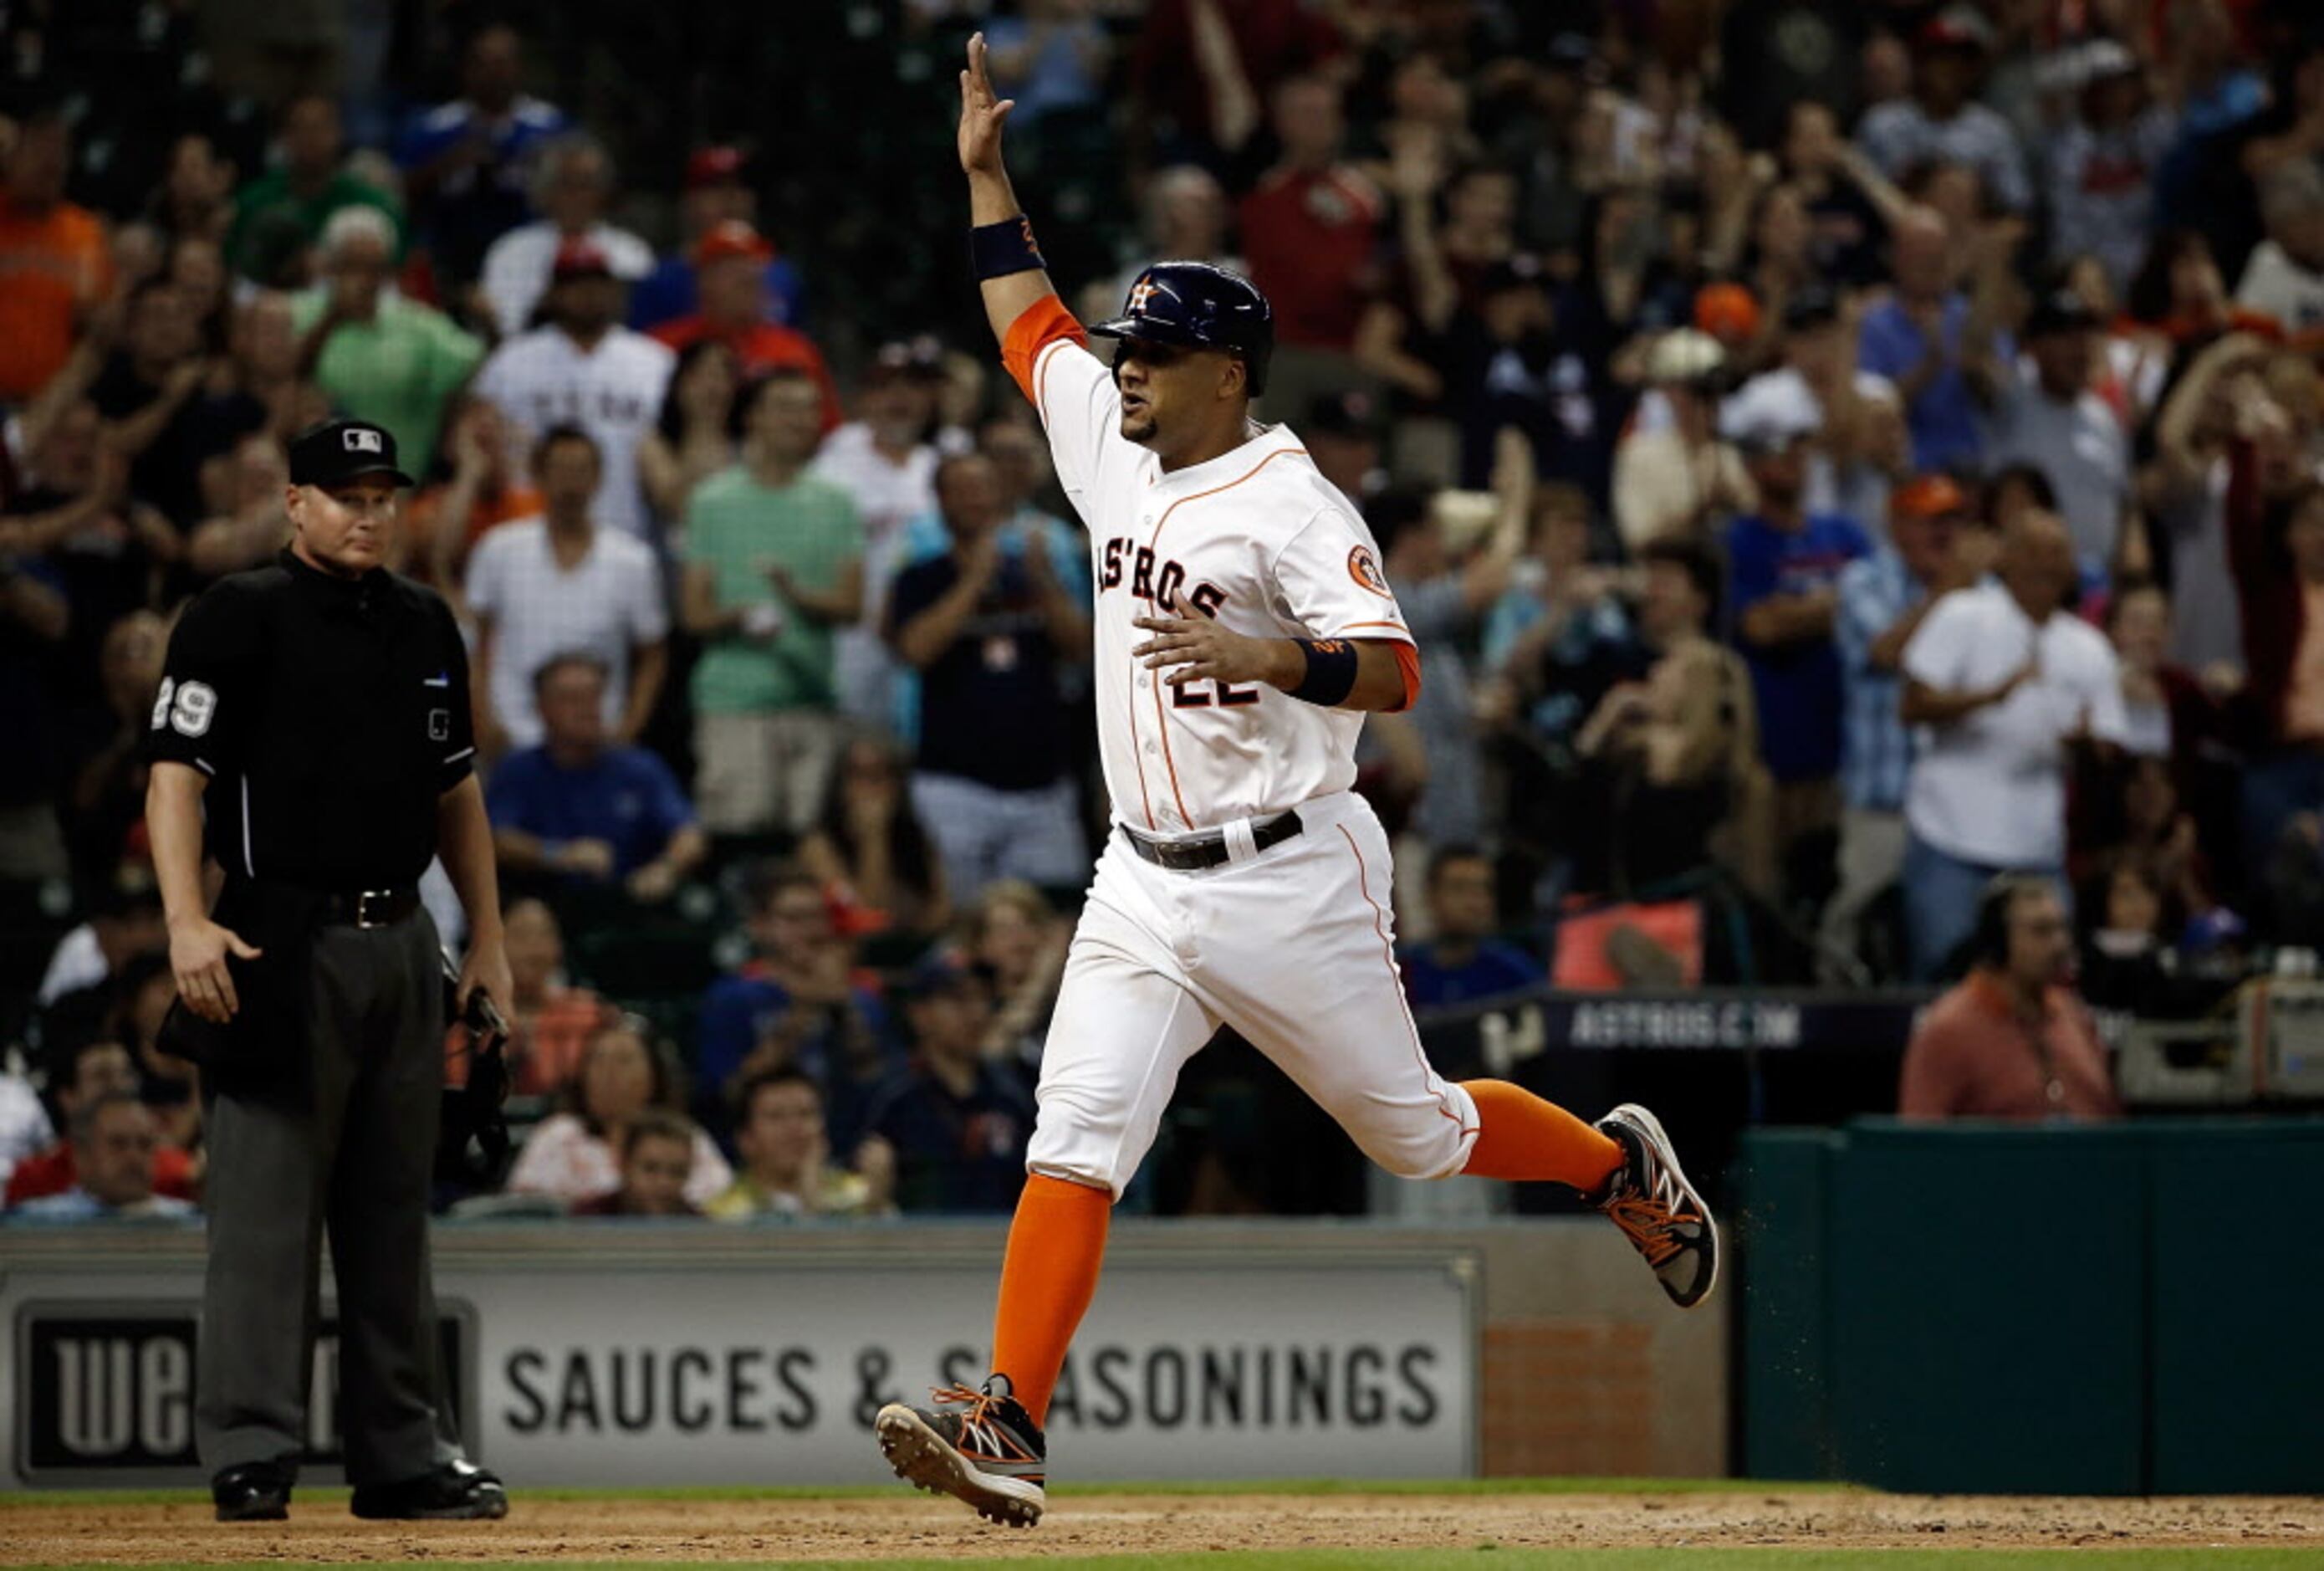 Mets swoop in overnight to sign Carlos Correa for $315m after Giants deal  stalls, MLB